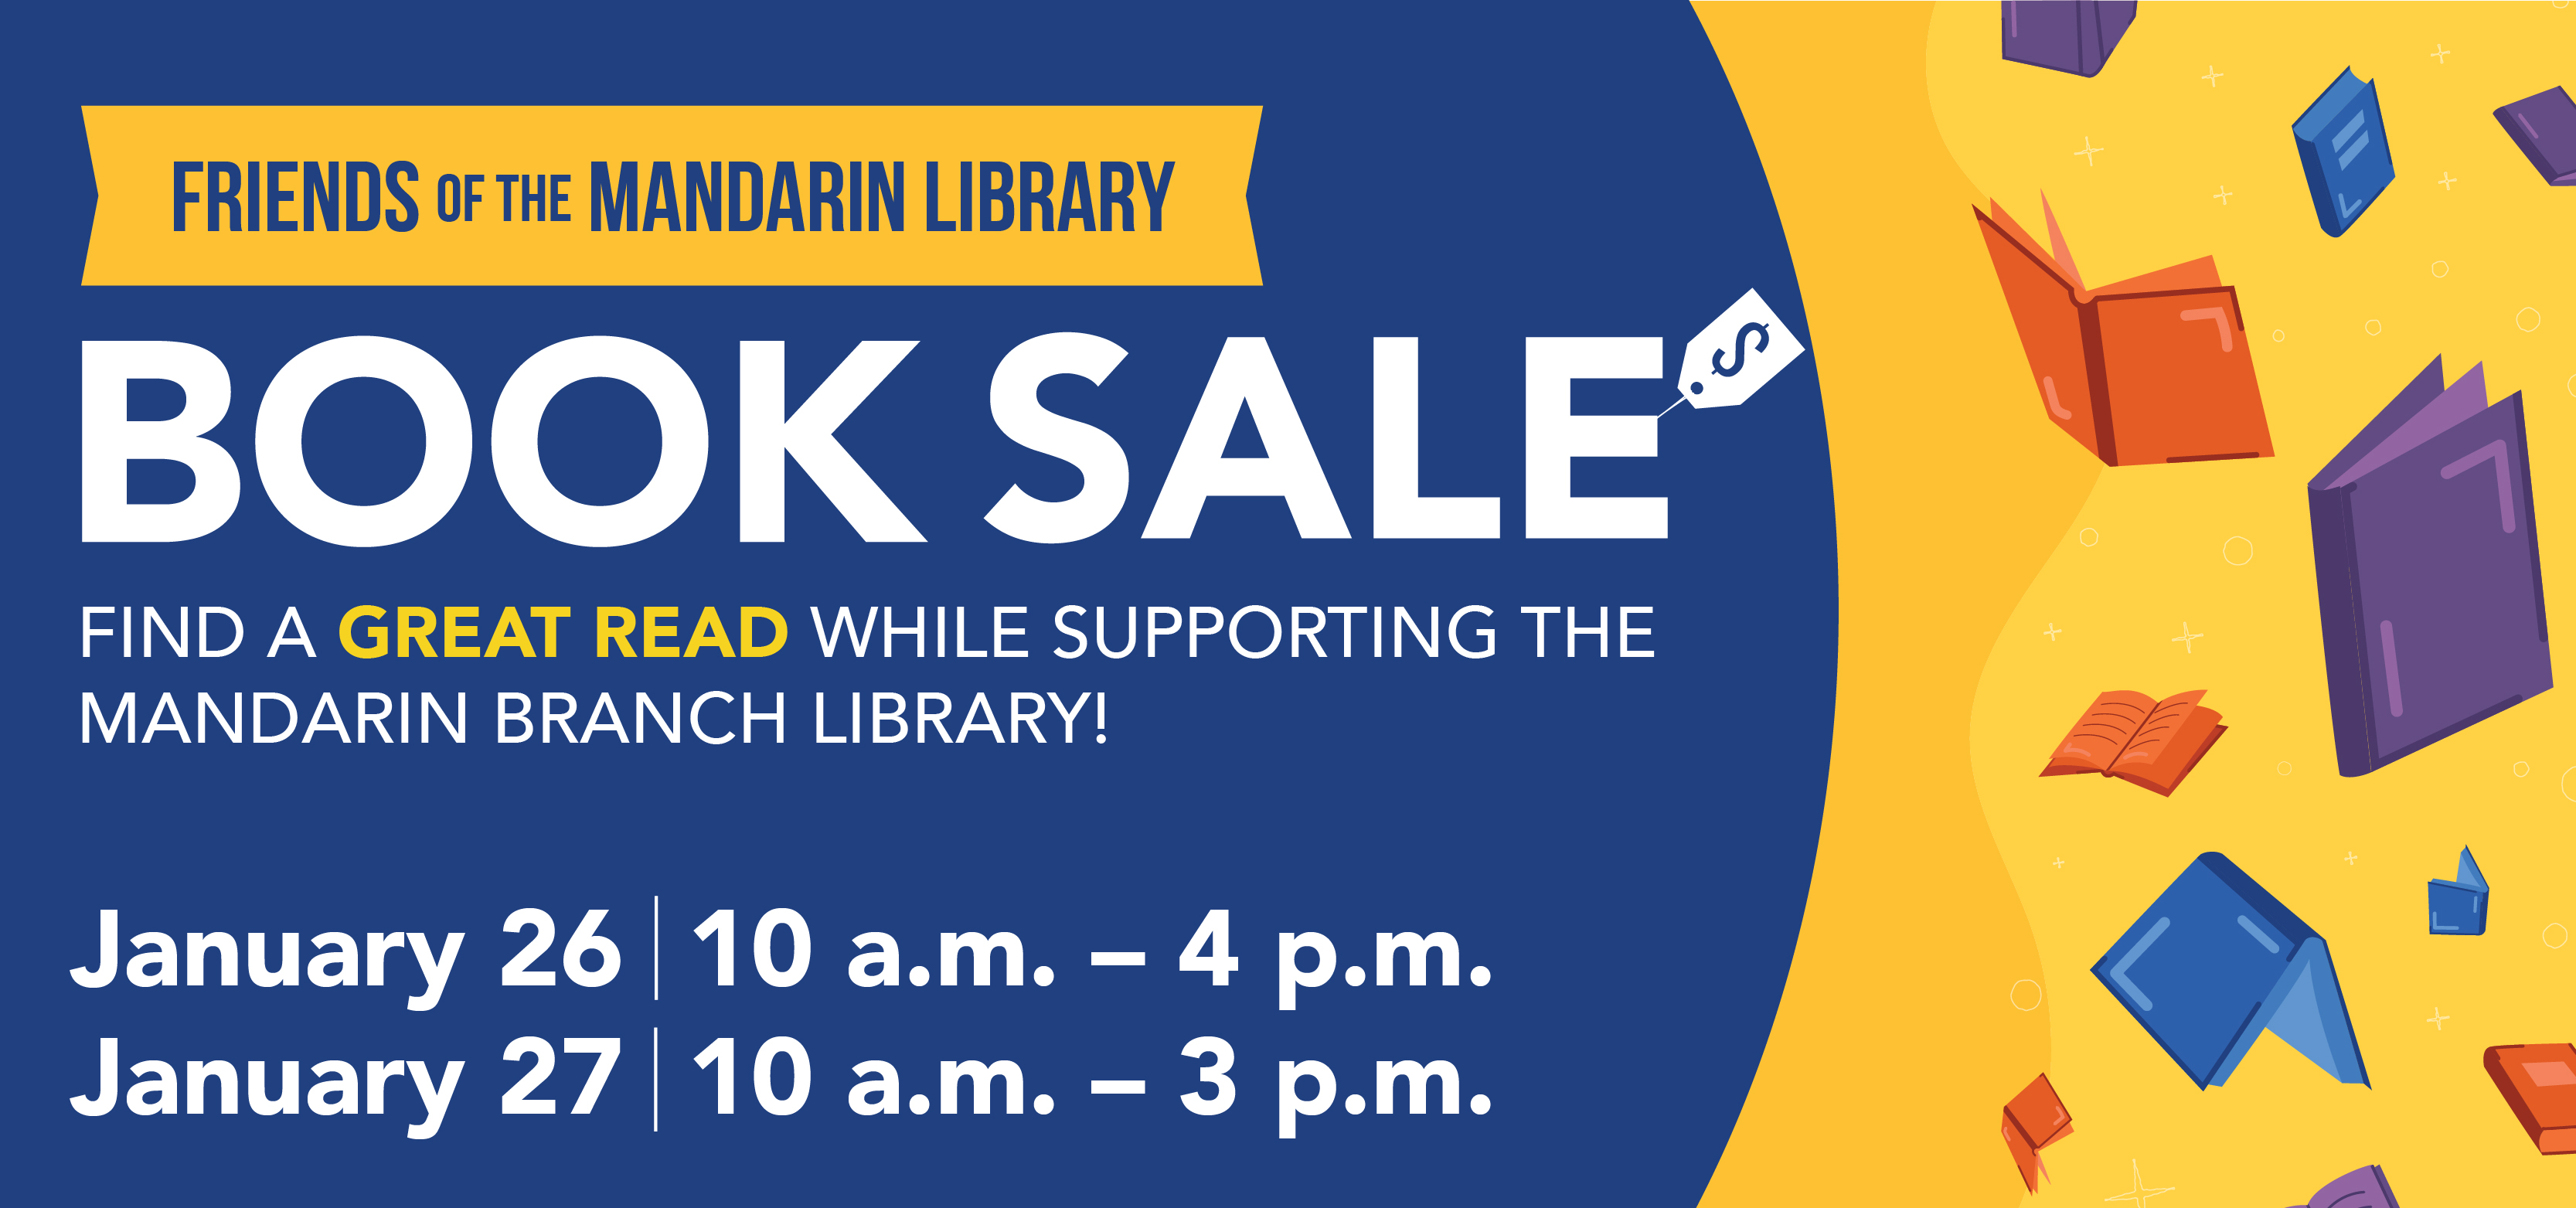 Graphic for Friends of the Mandarin Library Book Sale.